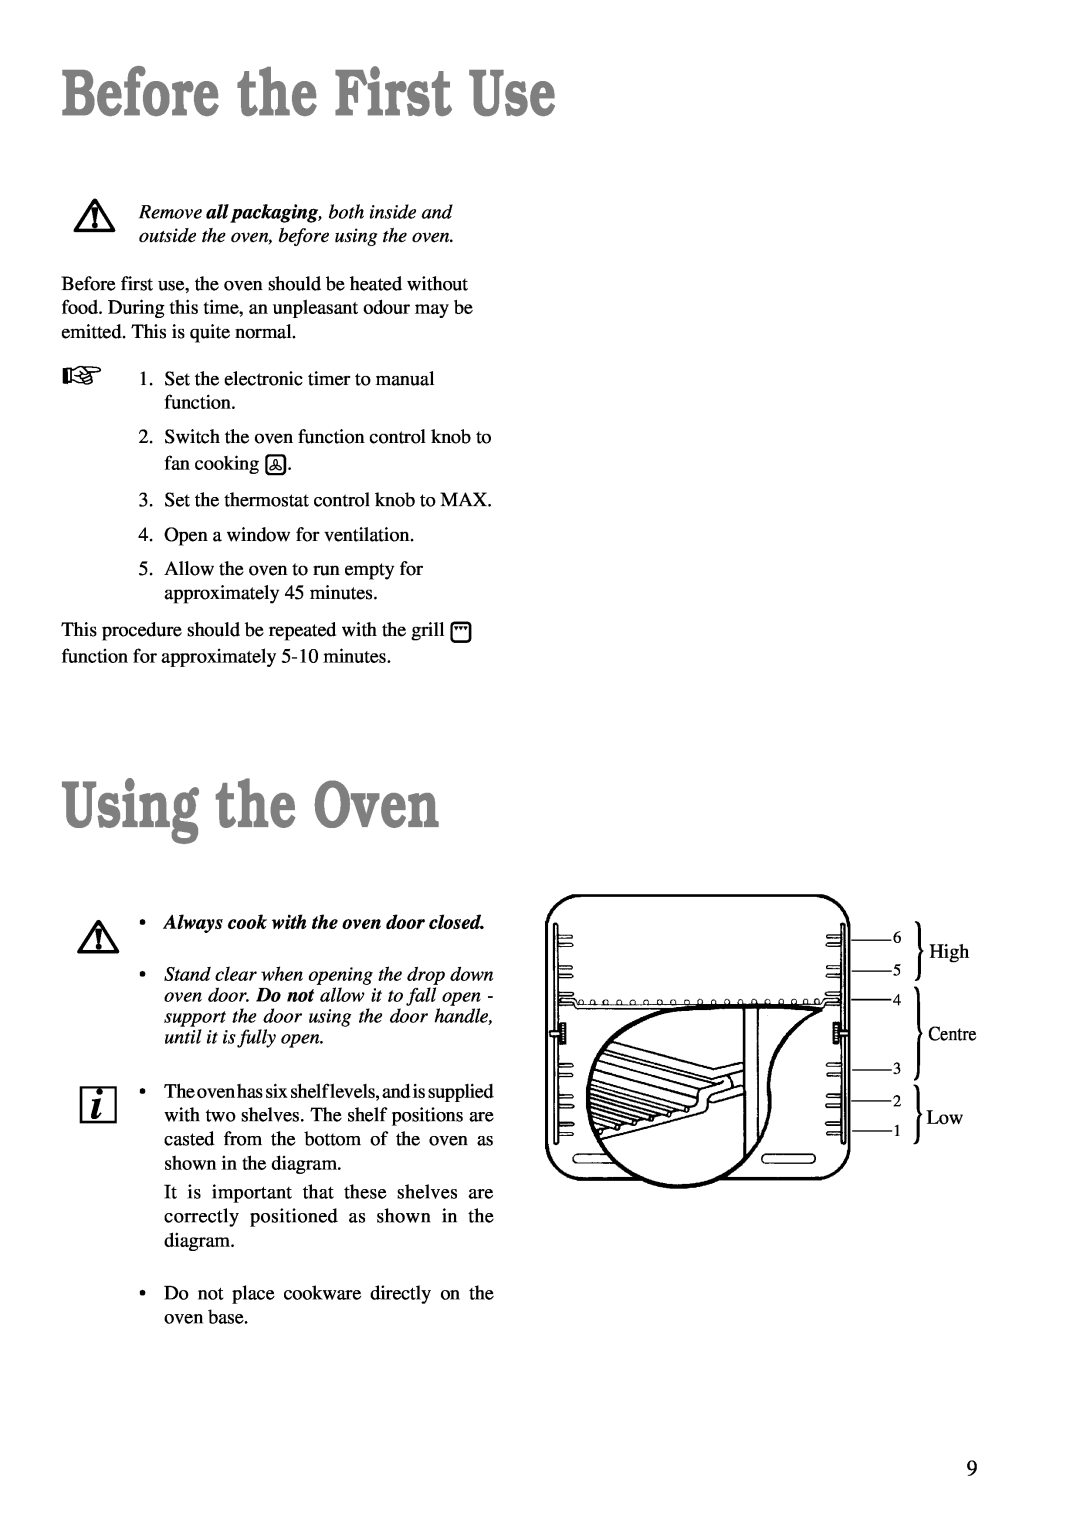 Zanussi ZBF 863 manual Before the First Use, Using the Oven, Always cook with the oven door closed 